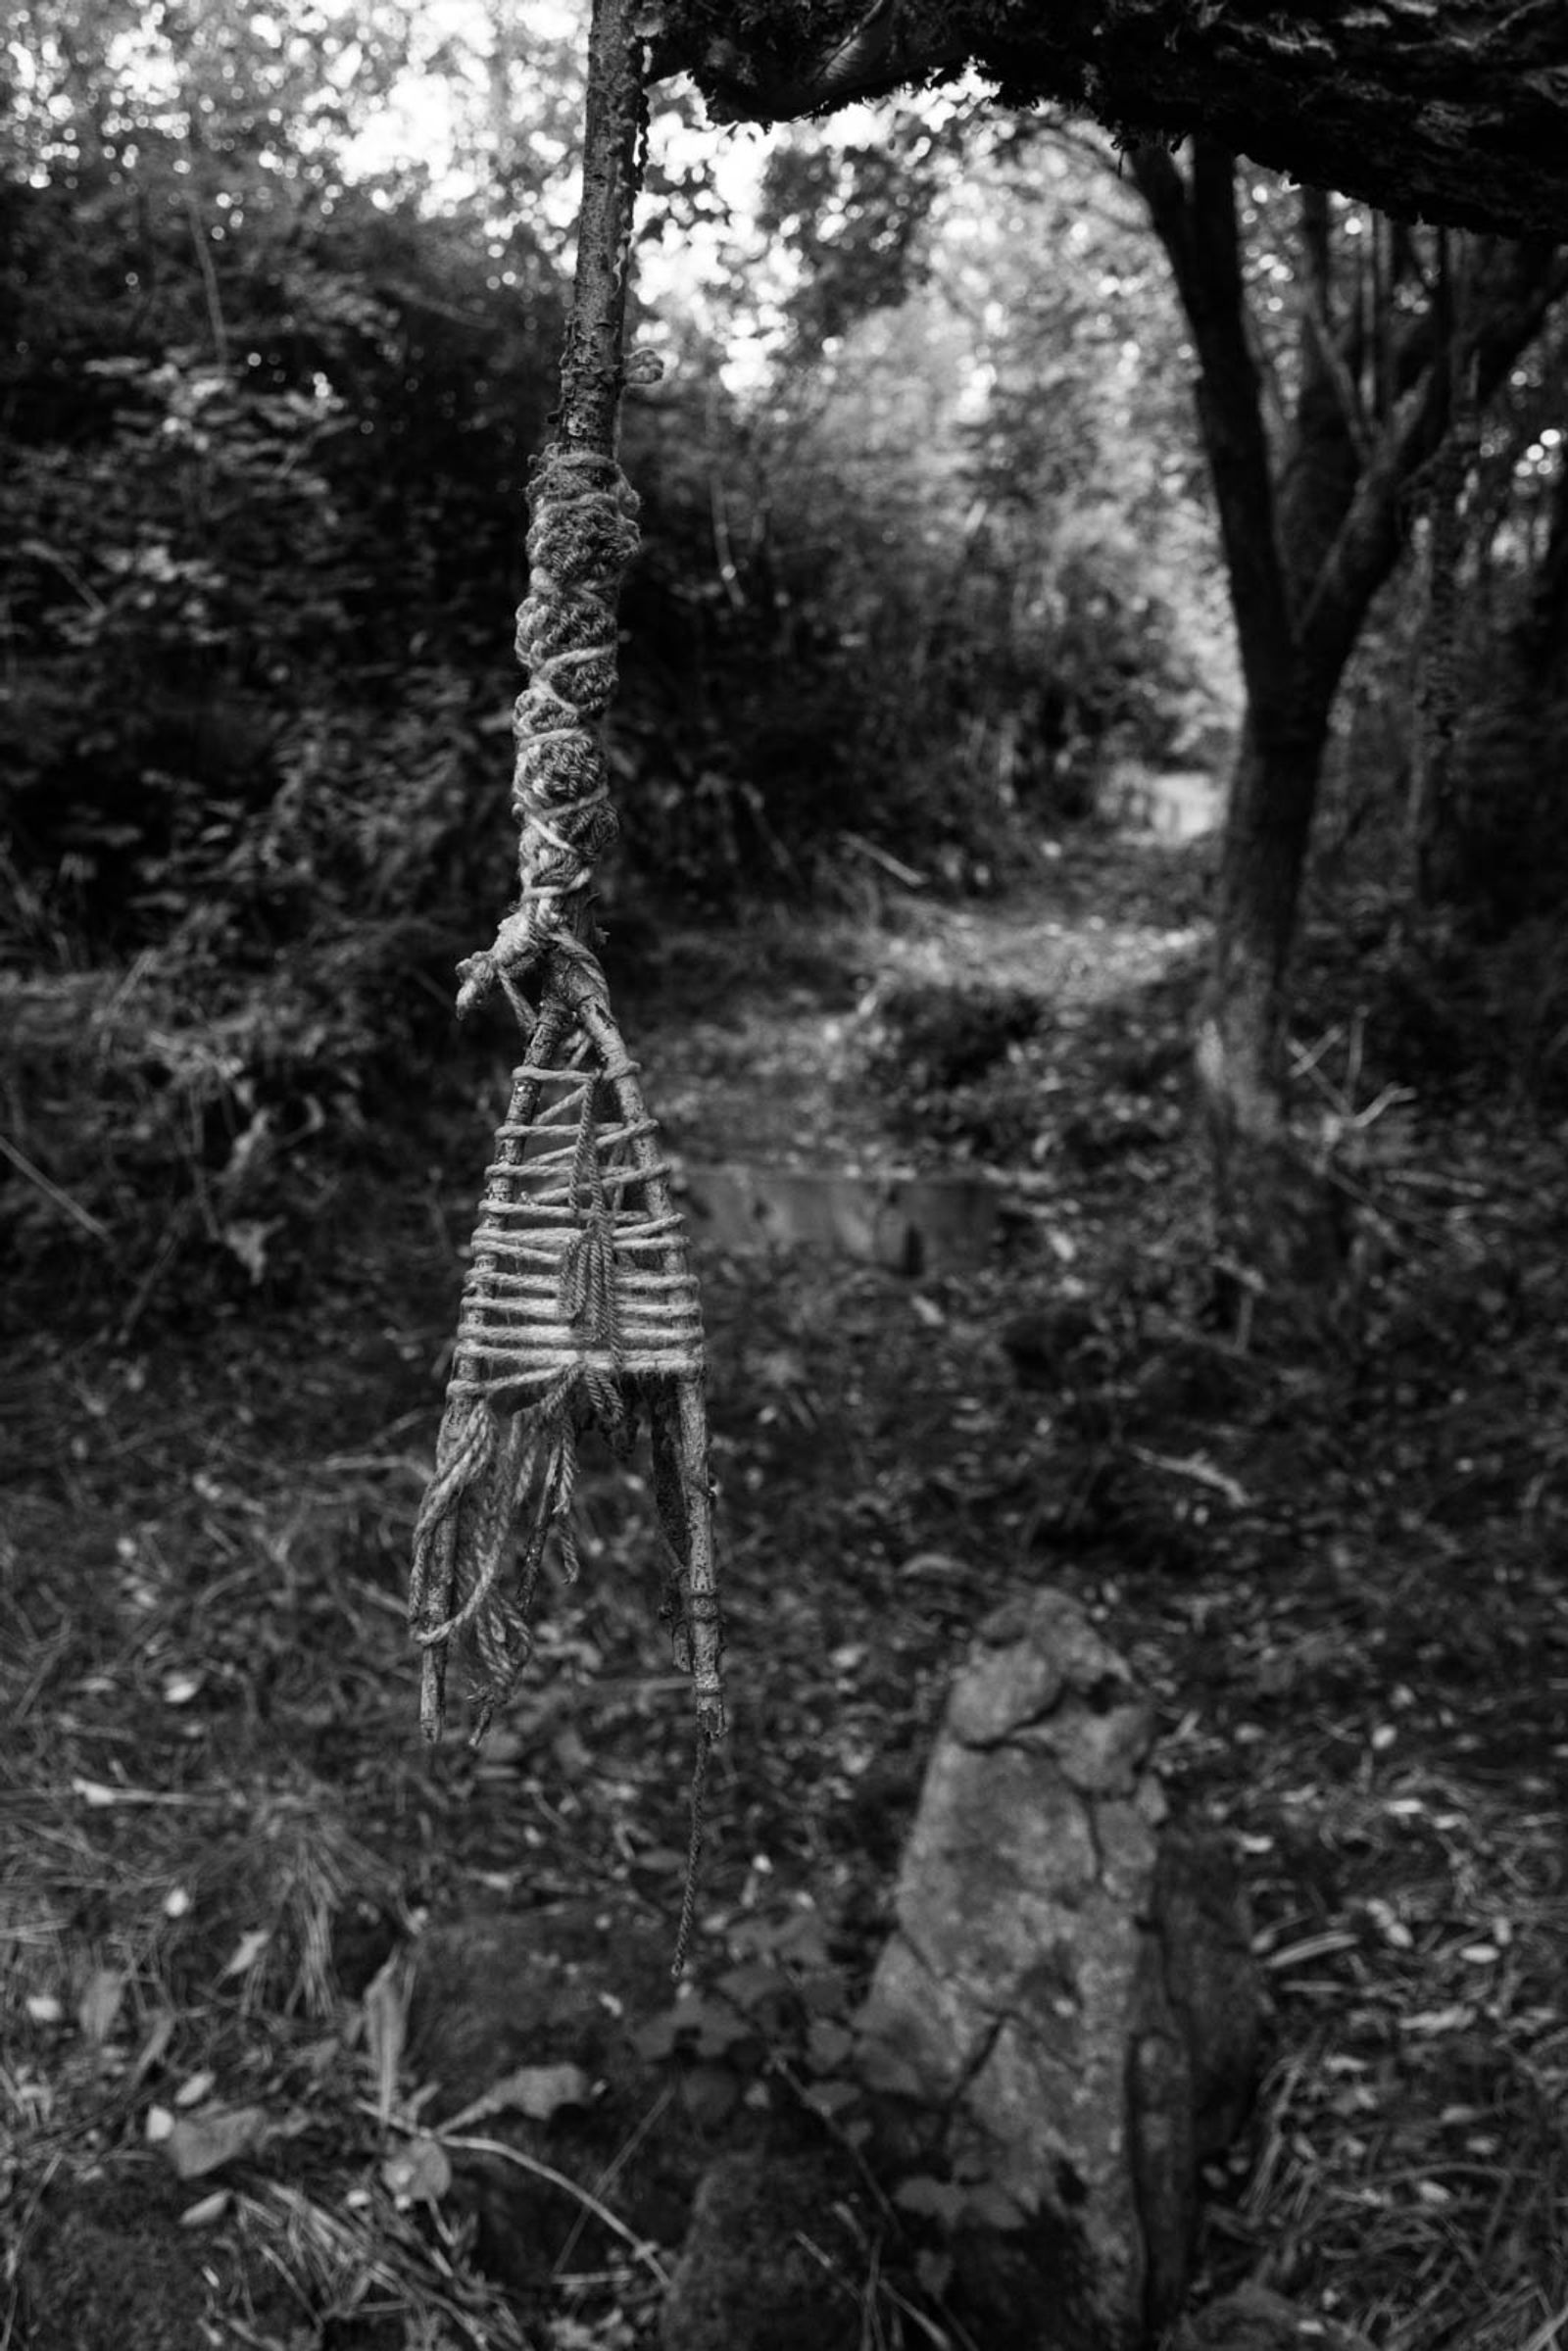 © Roisin White - Image from the Cross The Child's Palm with Silver photography project